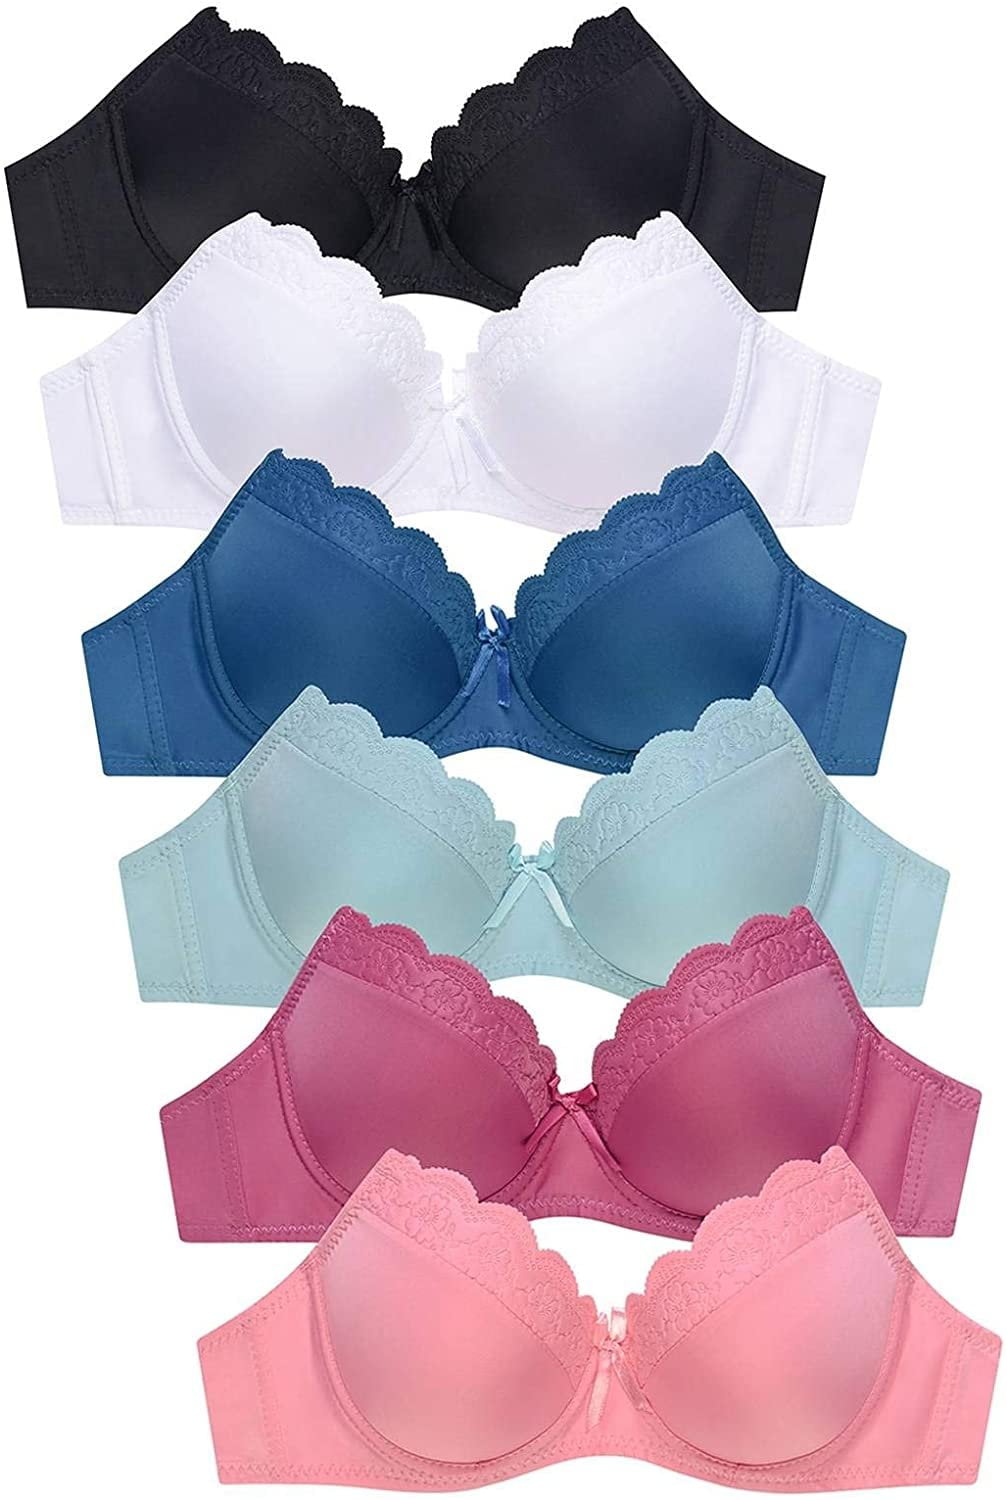 Mamia Womens Basic Laceplain Lace Bras Pack Of 6 Various Styles 